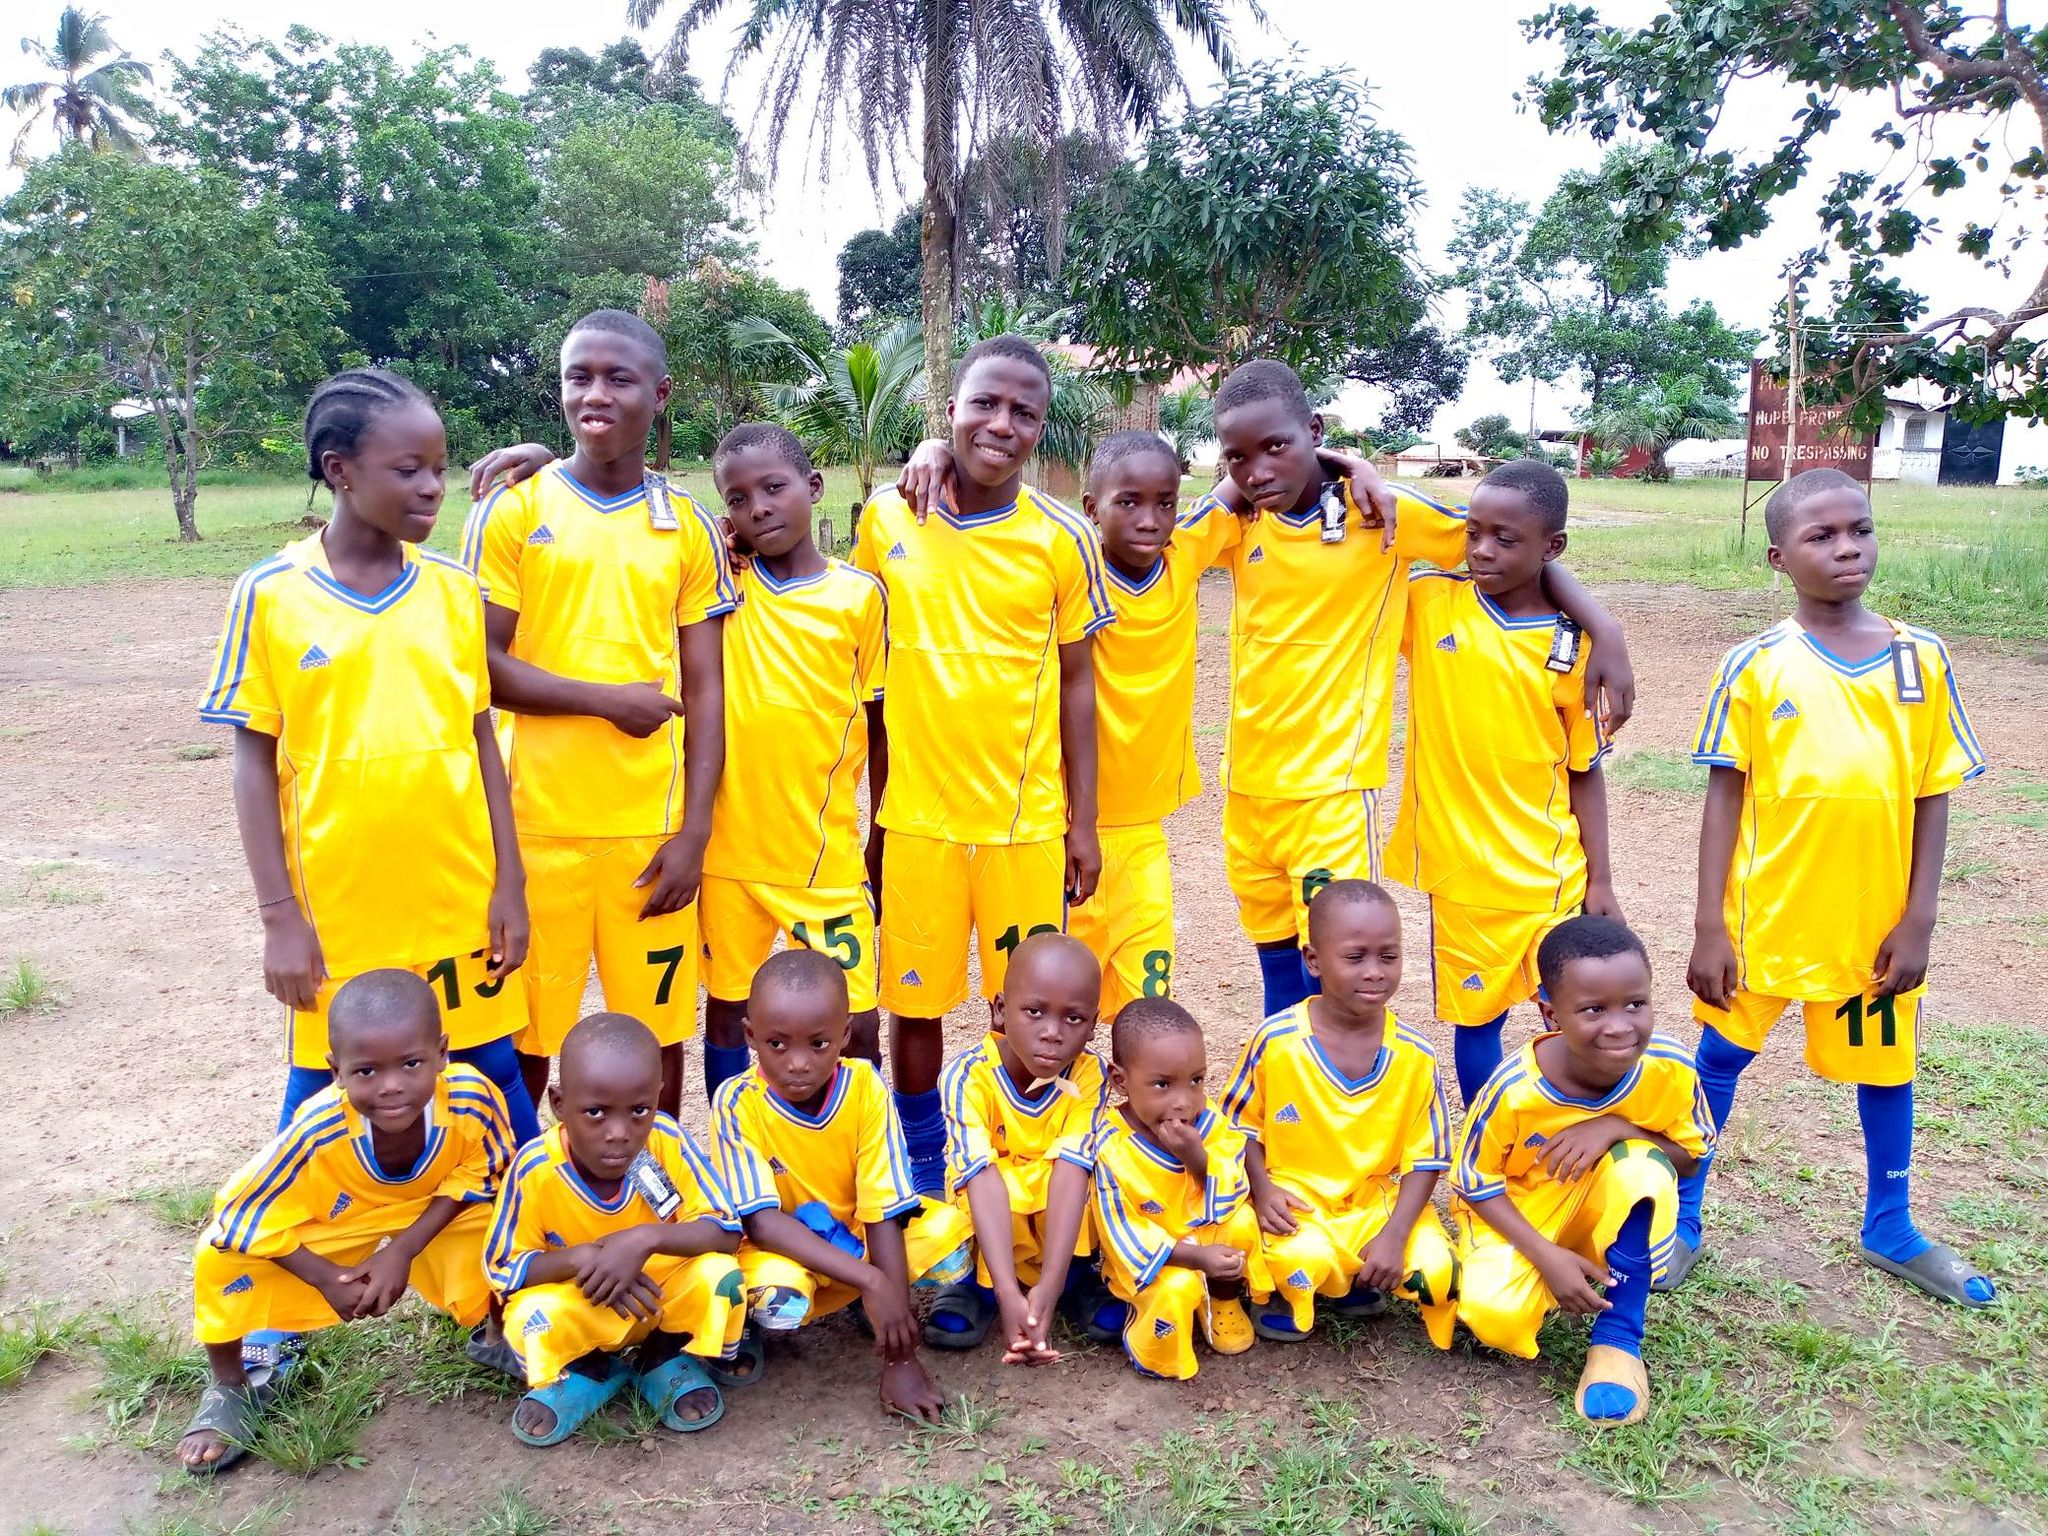 Samuel is coach and founder of the Power from God Football Team.  We call it soccer.  Samuel is No. 7. They have been playing for over one year now.